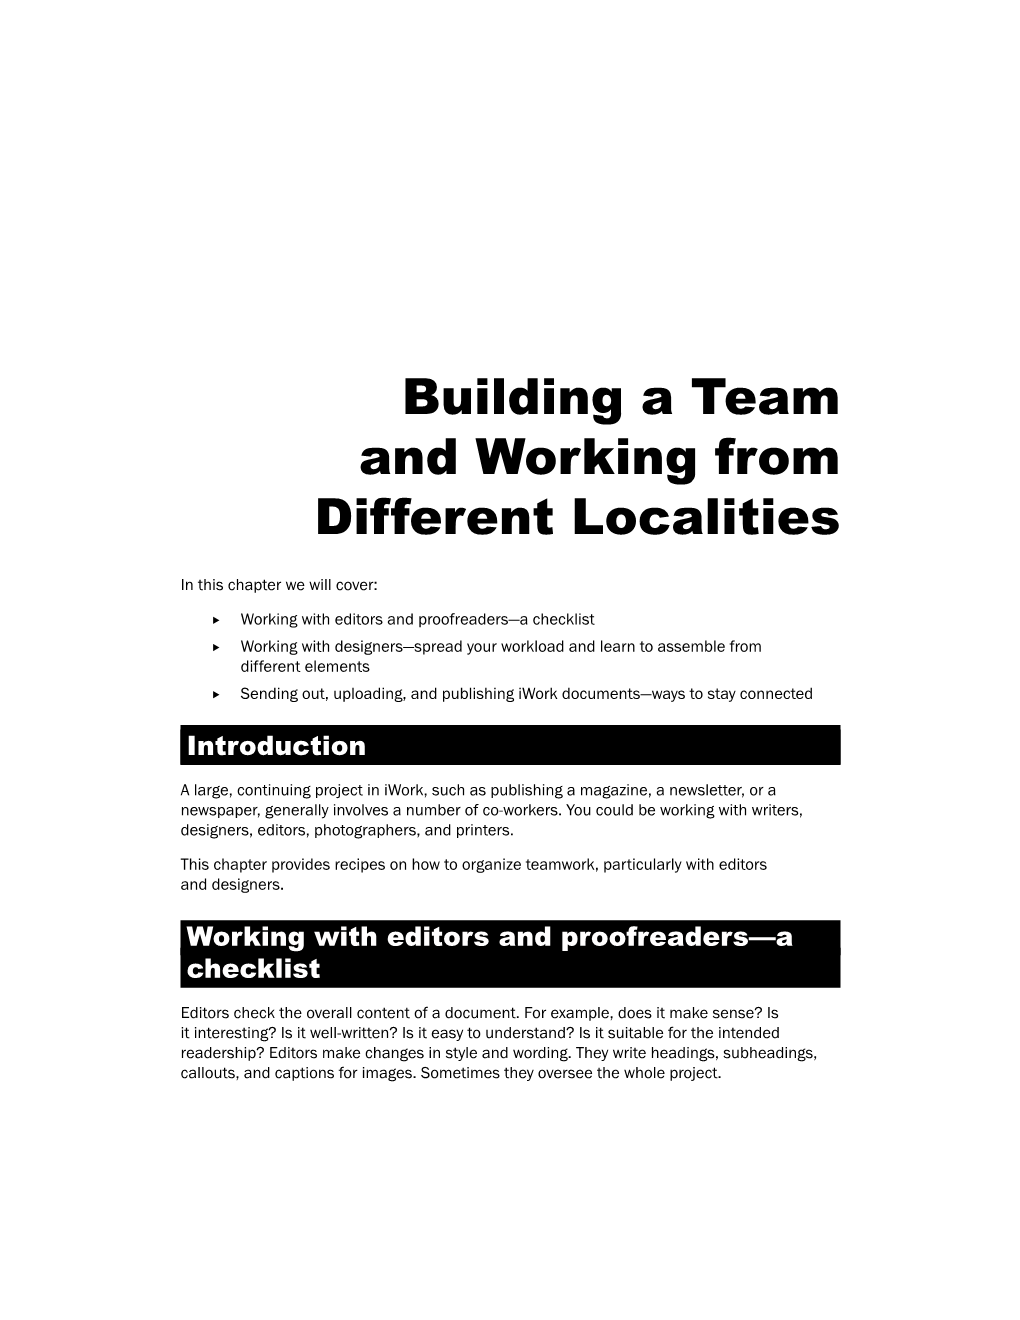 Building a Team and Working from Different Localities